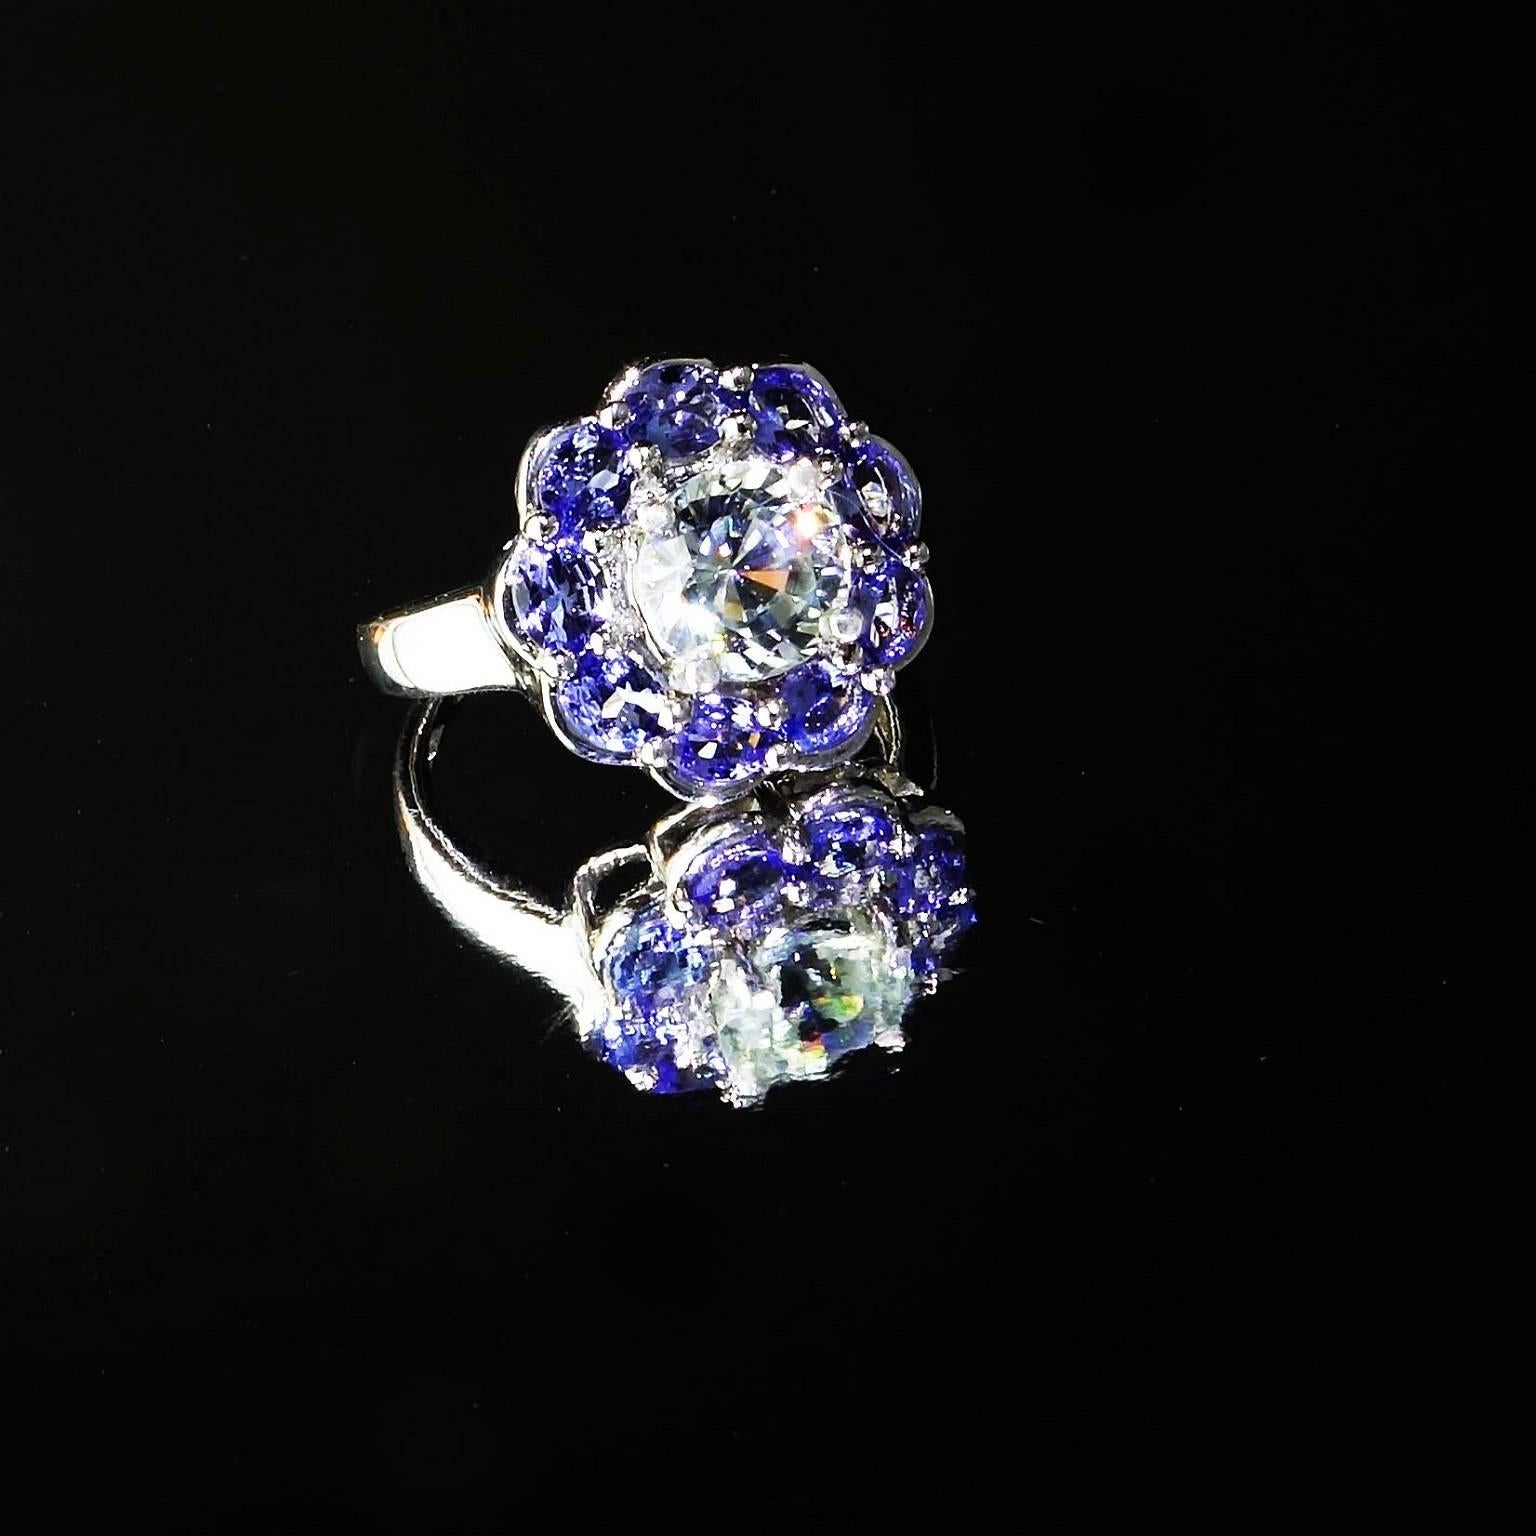 Fancy Cocktail Ring of Sparkling Round Cambodian Zircon, 2.70ct, and Tanzanites, 1.44ct. The ring measures 5/8 inches across the top. This unique ring is a show stopper, it ring sparkles and pops and can't wait to be seen! Size 7.Not sizable. 